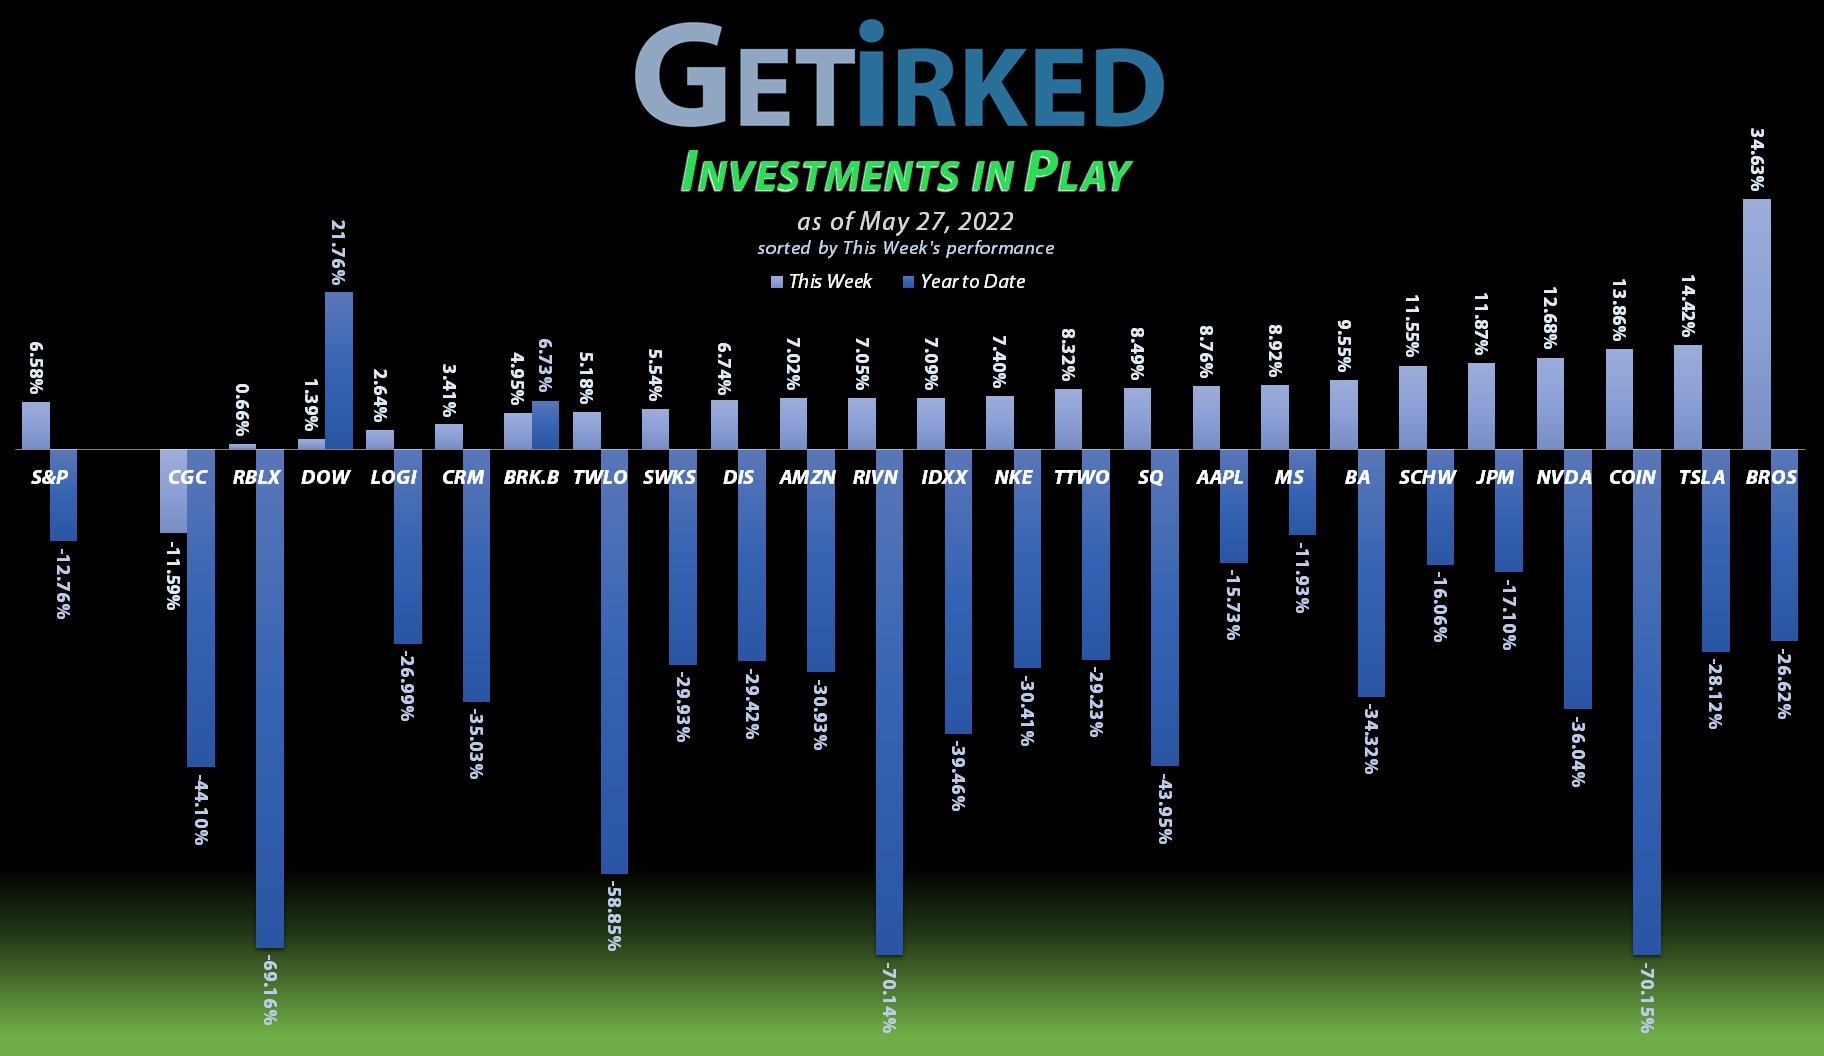 Get Irked - Investments in Play - May 27, 2022